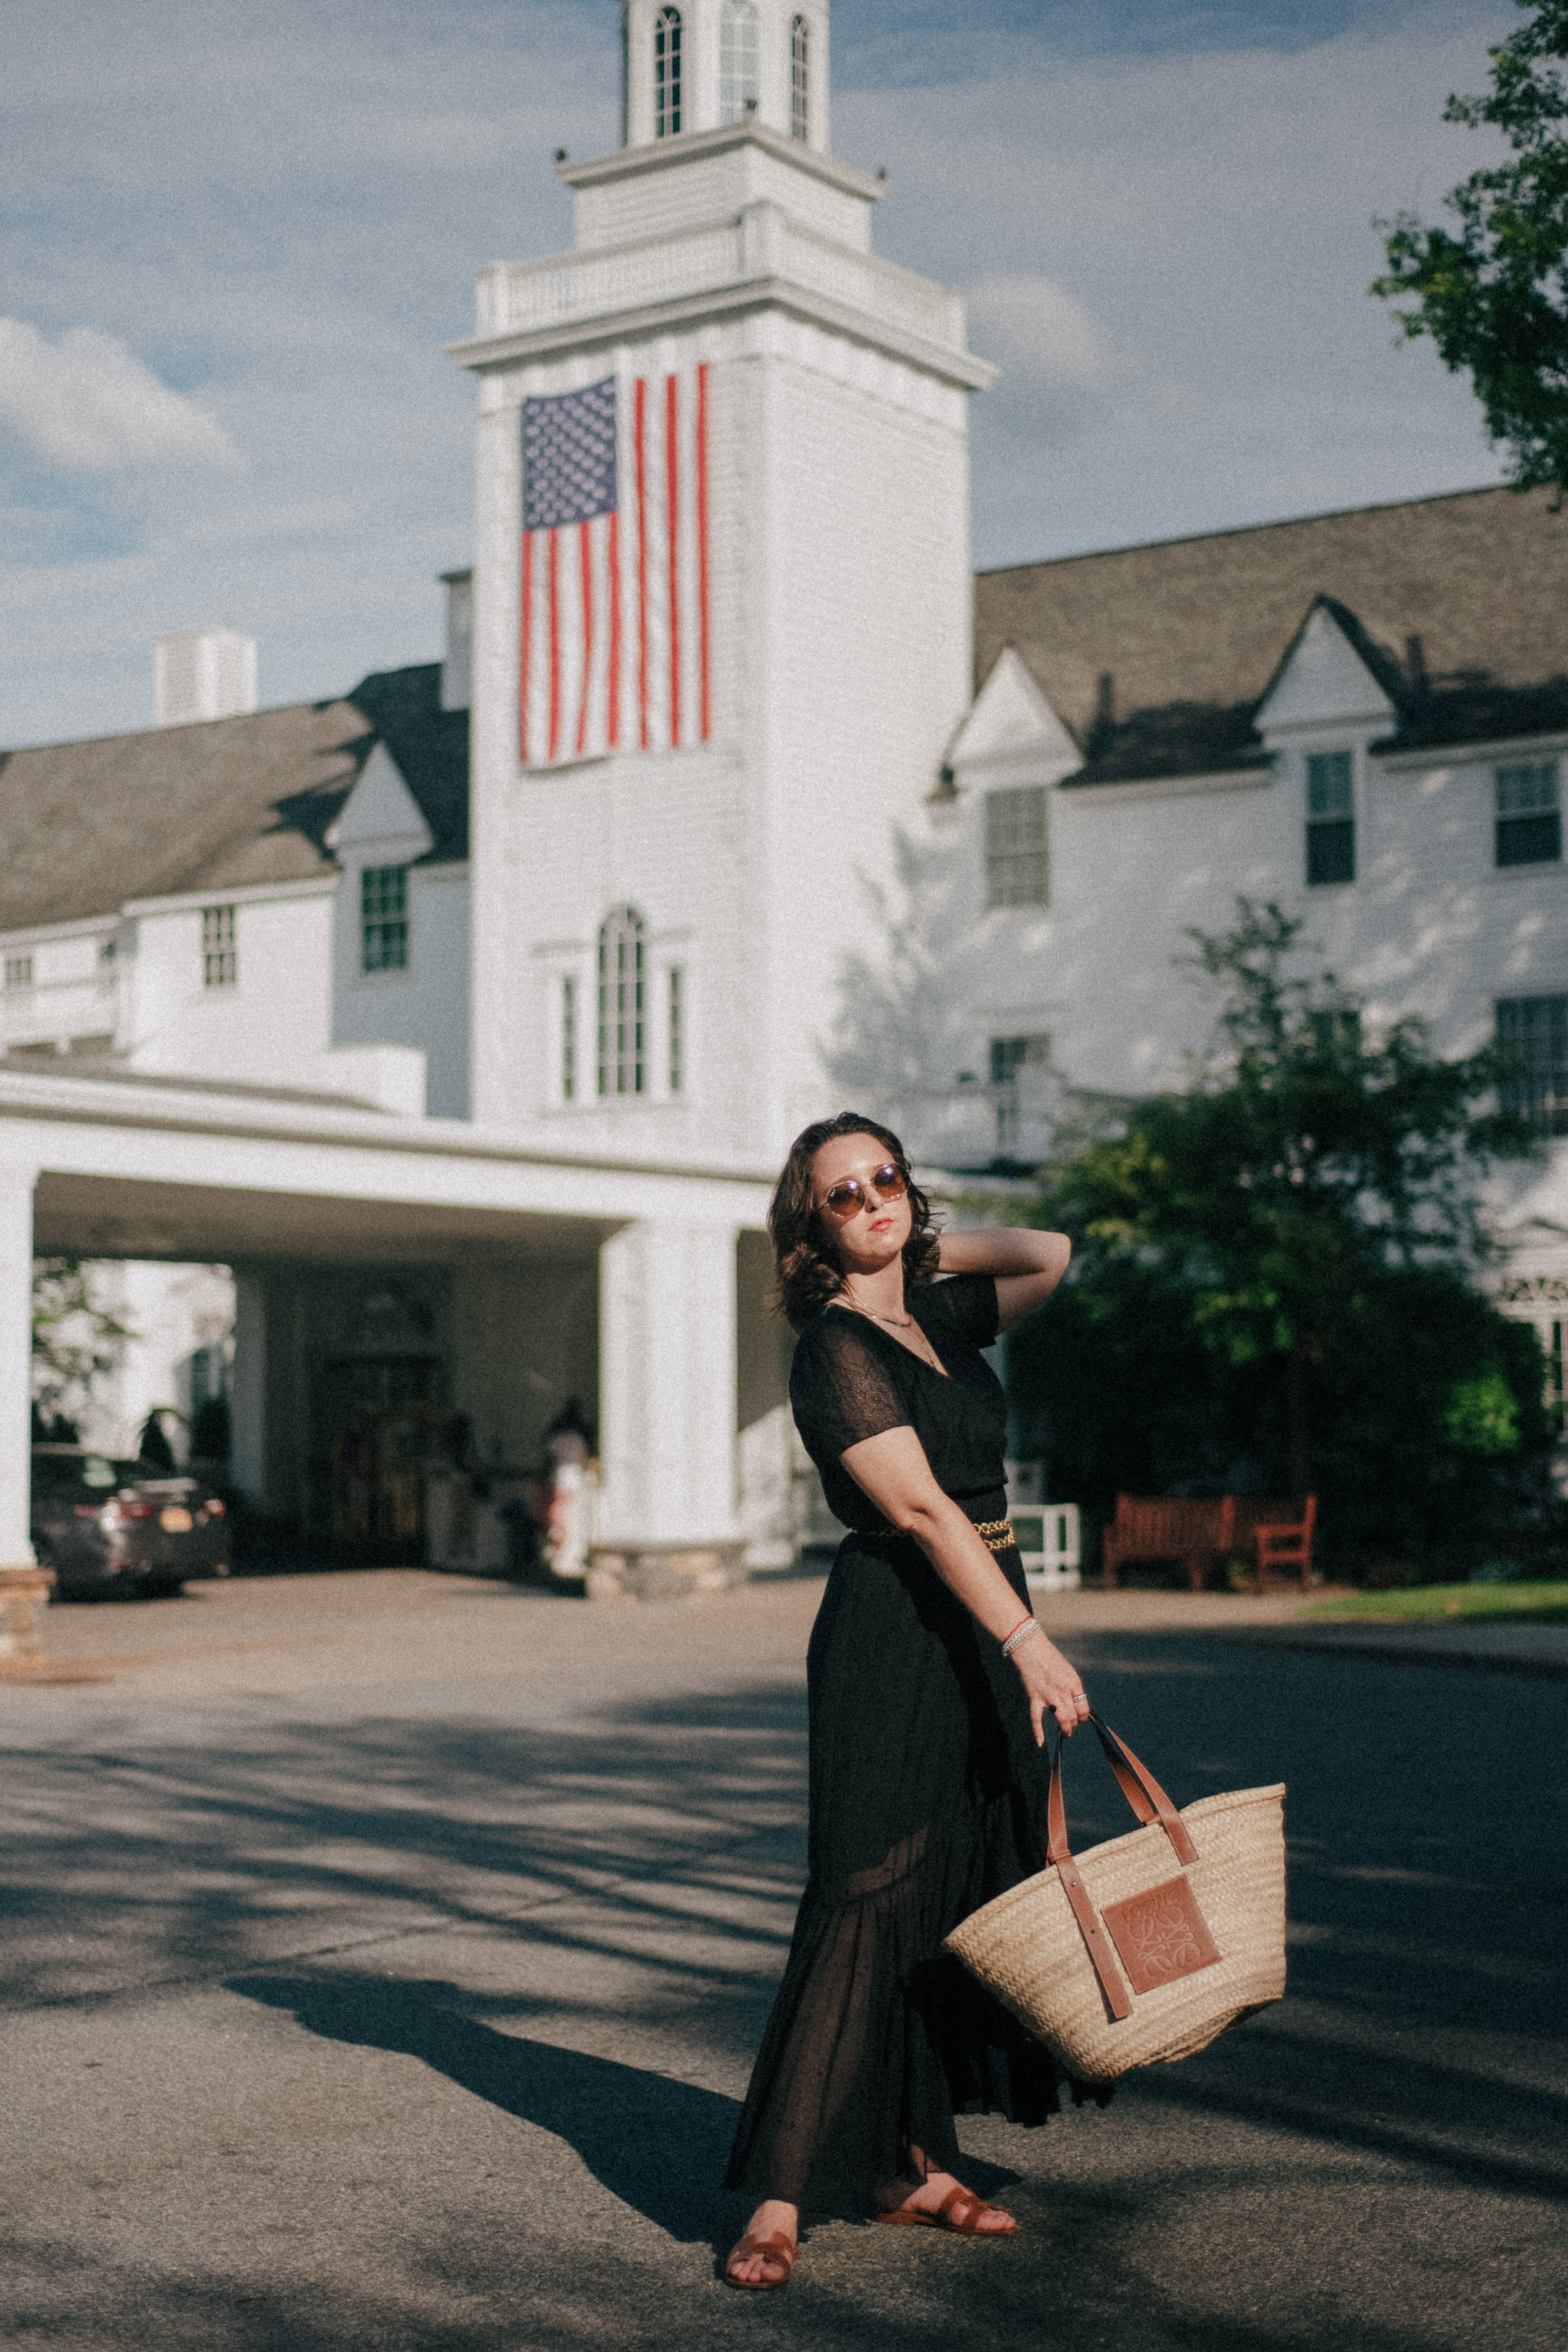 Three Day Getaway to The Sagamore Resort on Lake George New York - Simply by Simone in front of the Sagamore in Black Dress Weekend Review - North East Travel Guide